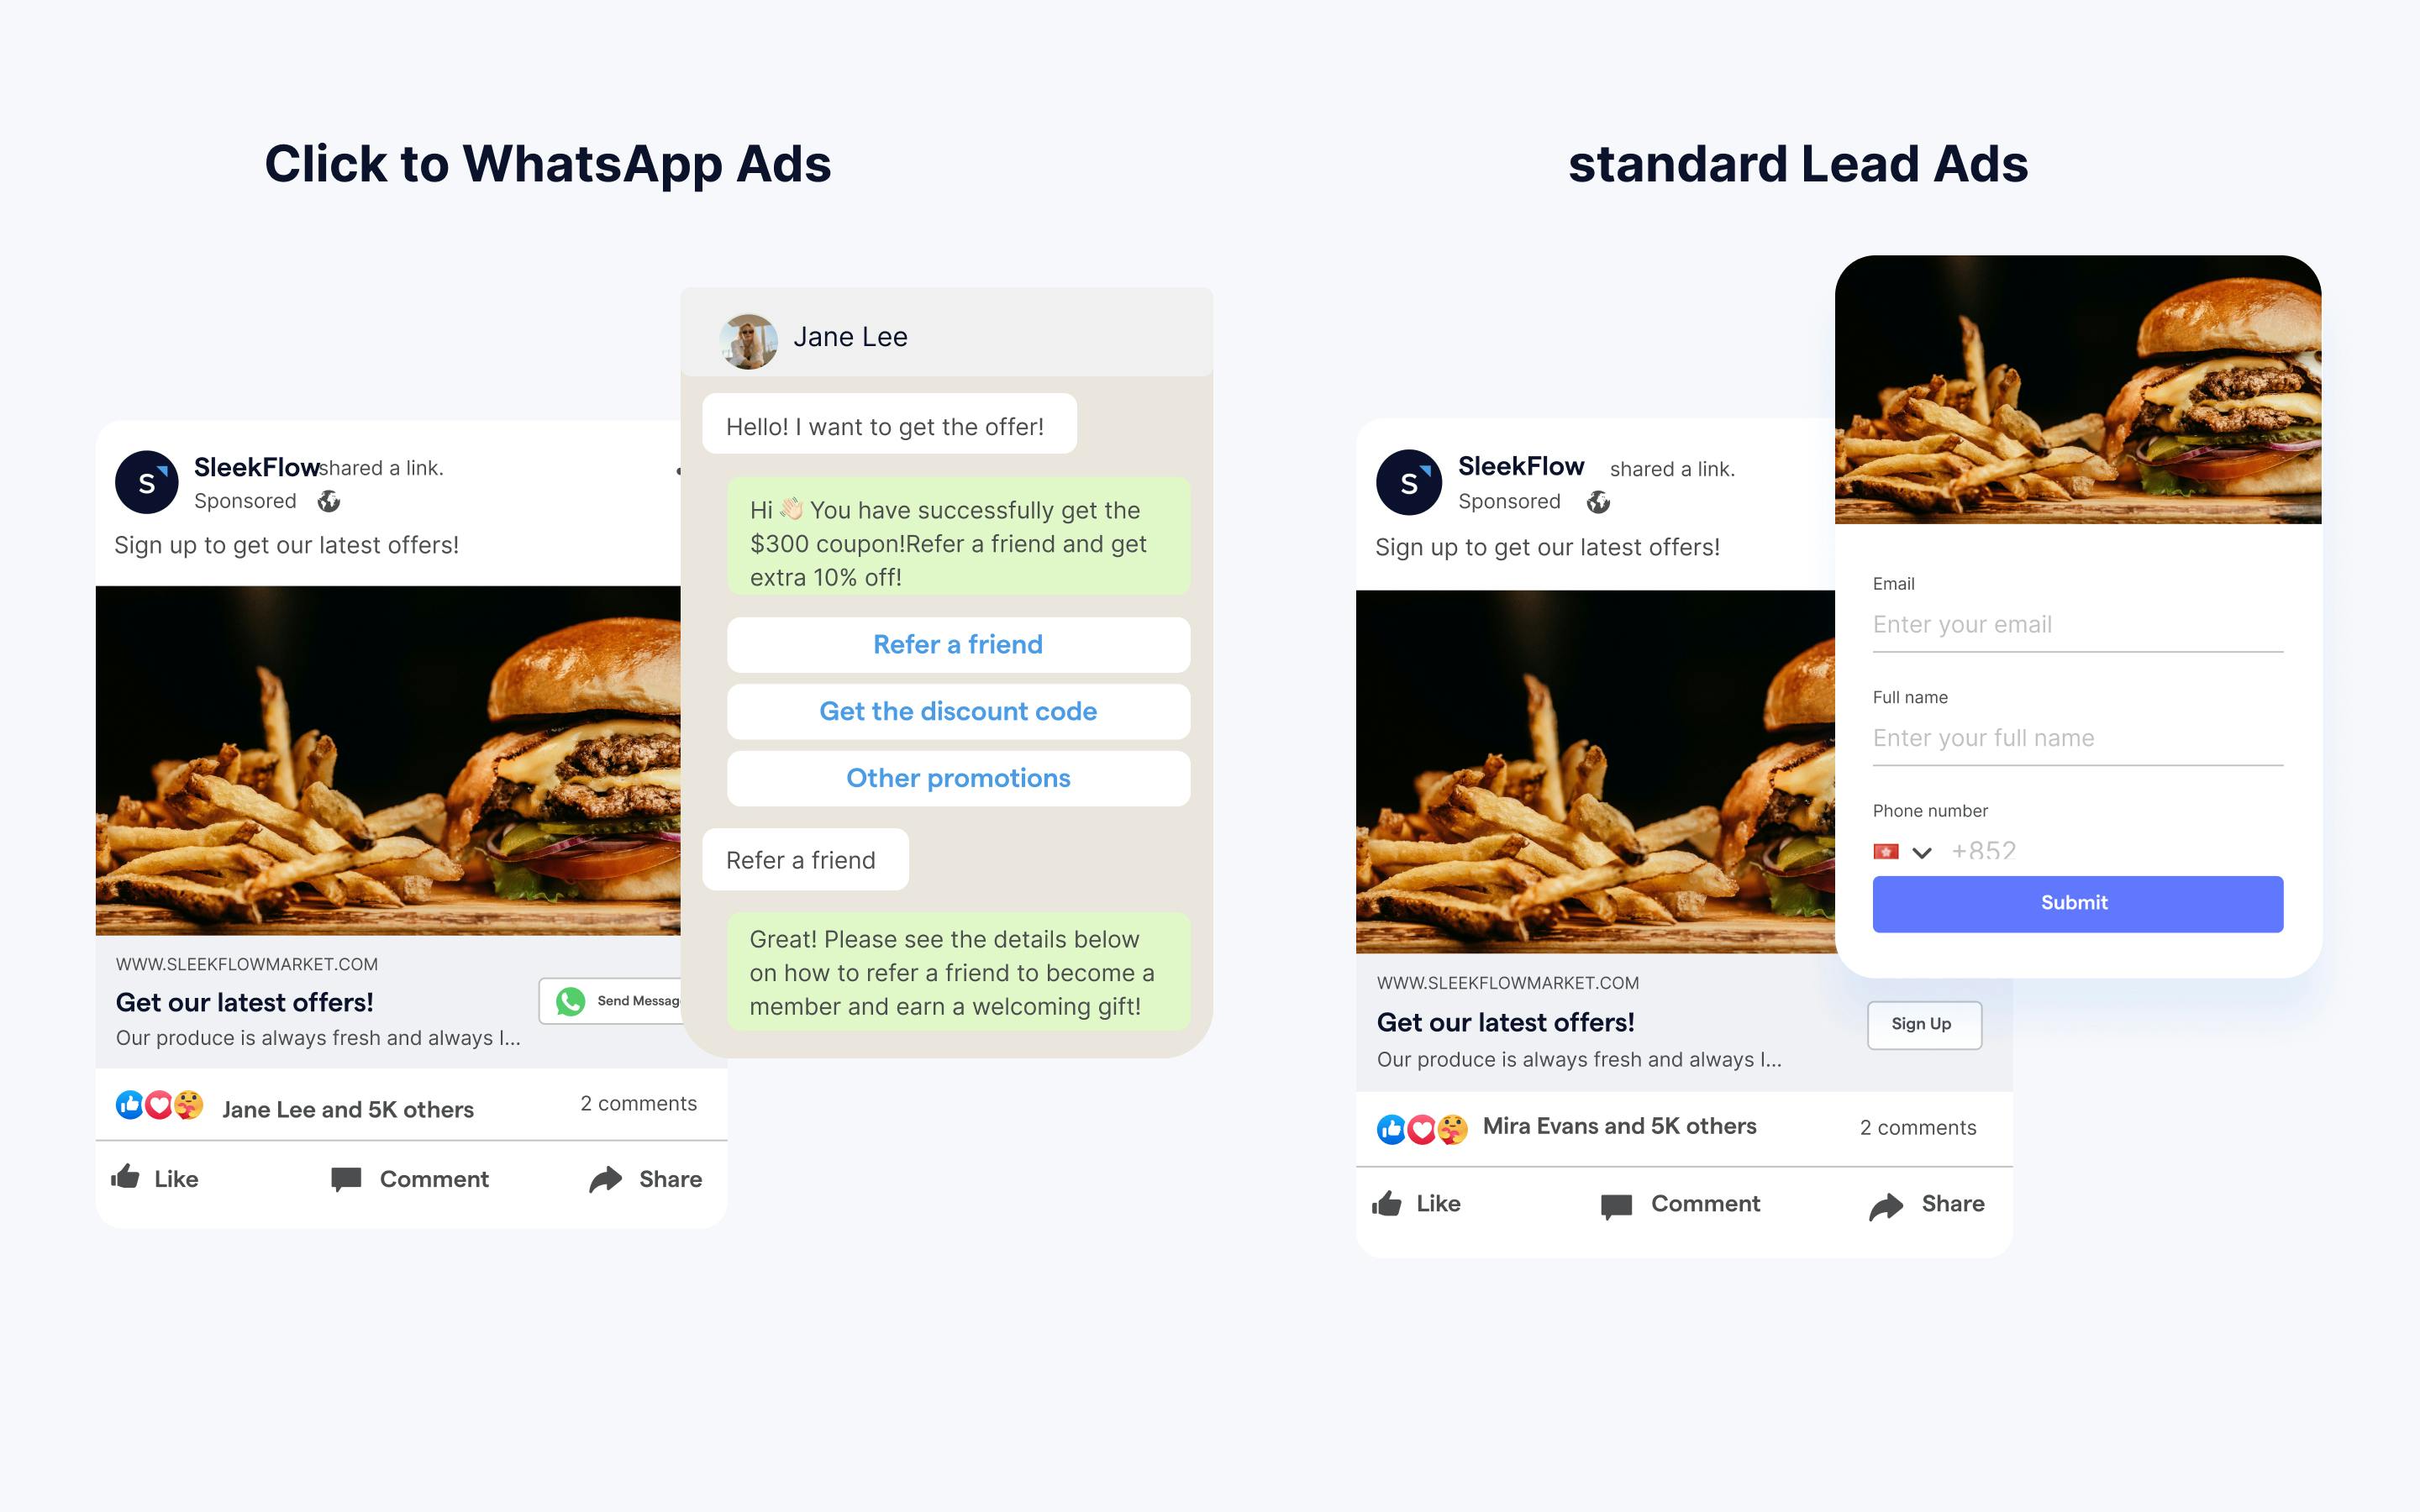 Click to WhatsApp ads vs Lead Ads on Facebook